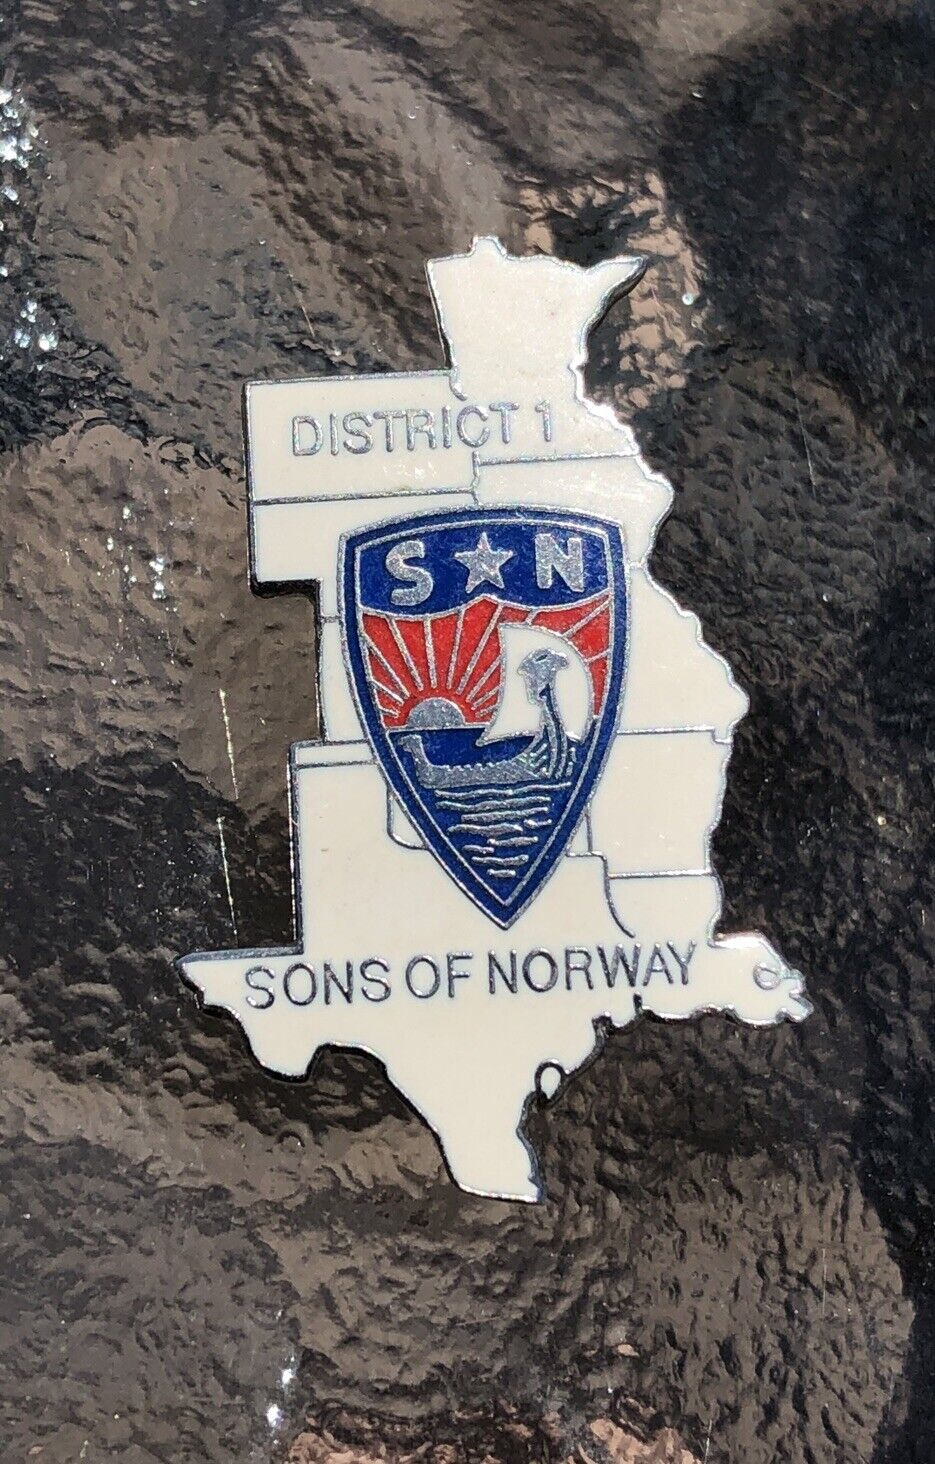 District 1 Sons Of Norway Collectors Metal Lapel Pin